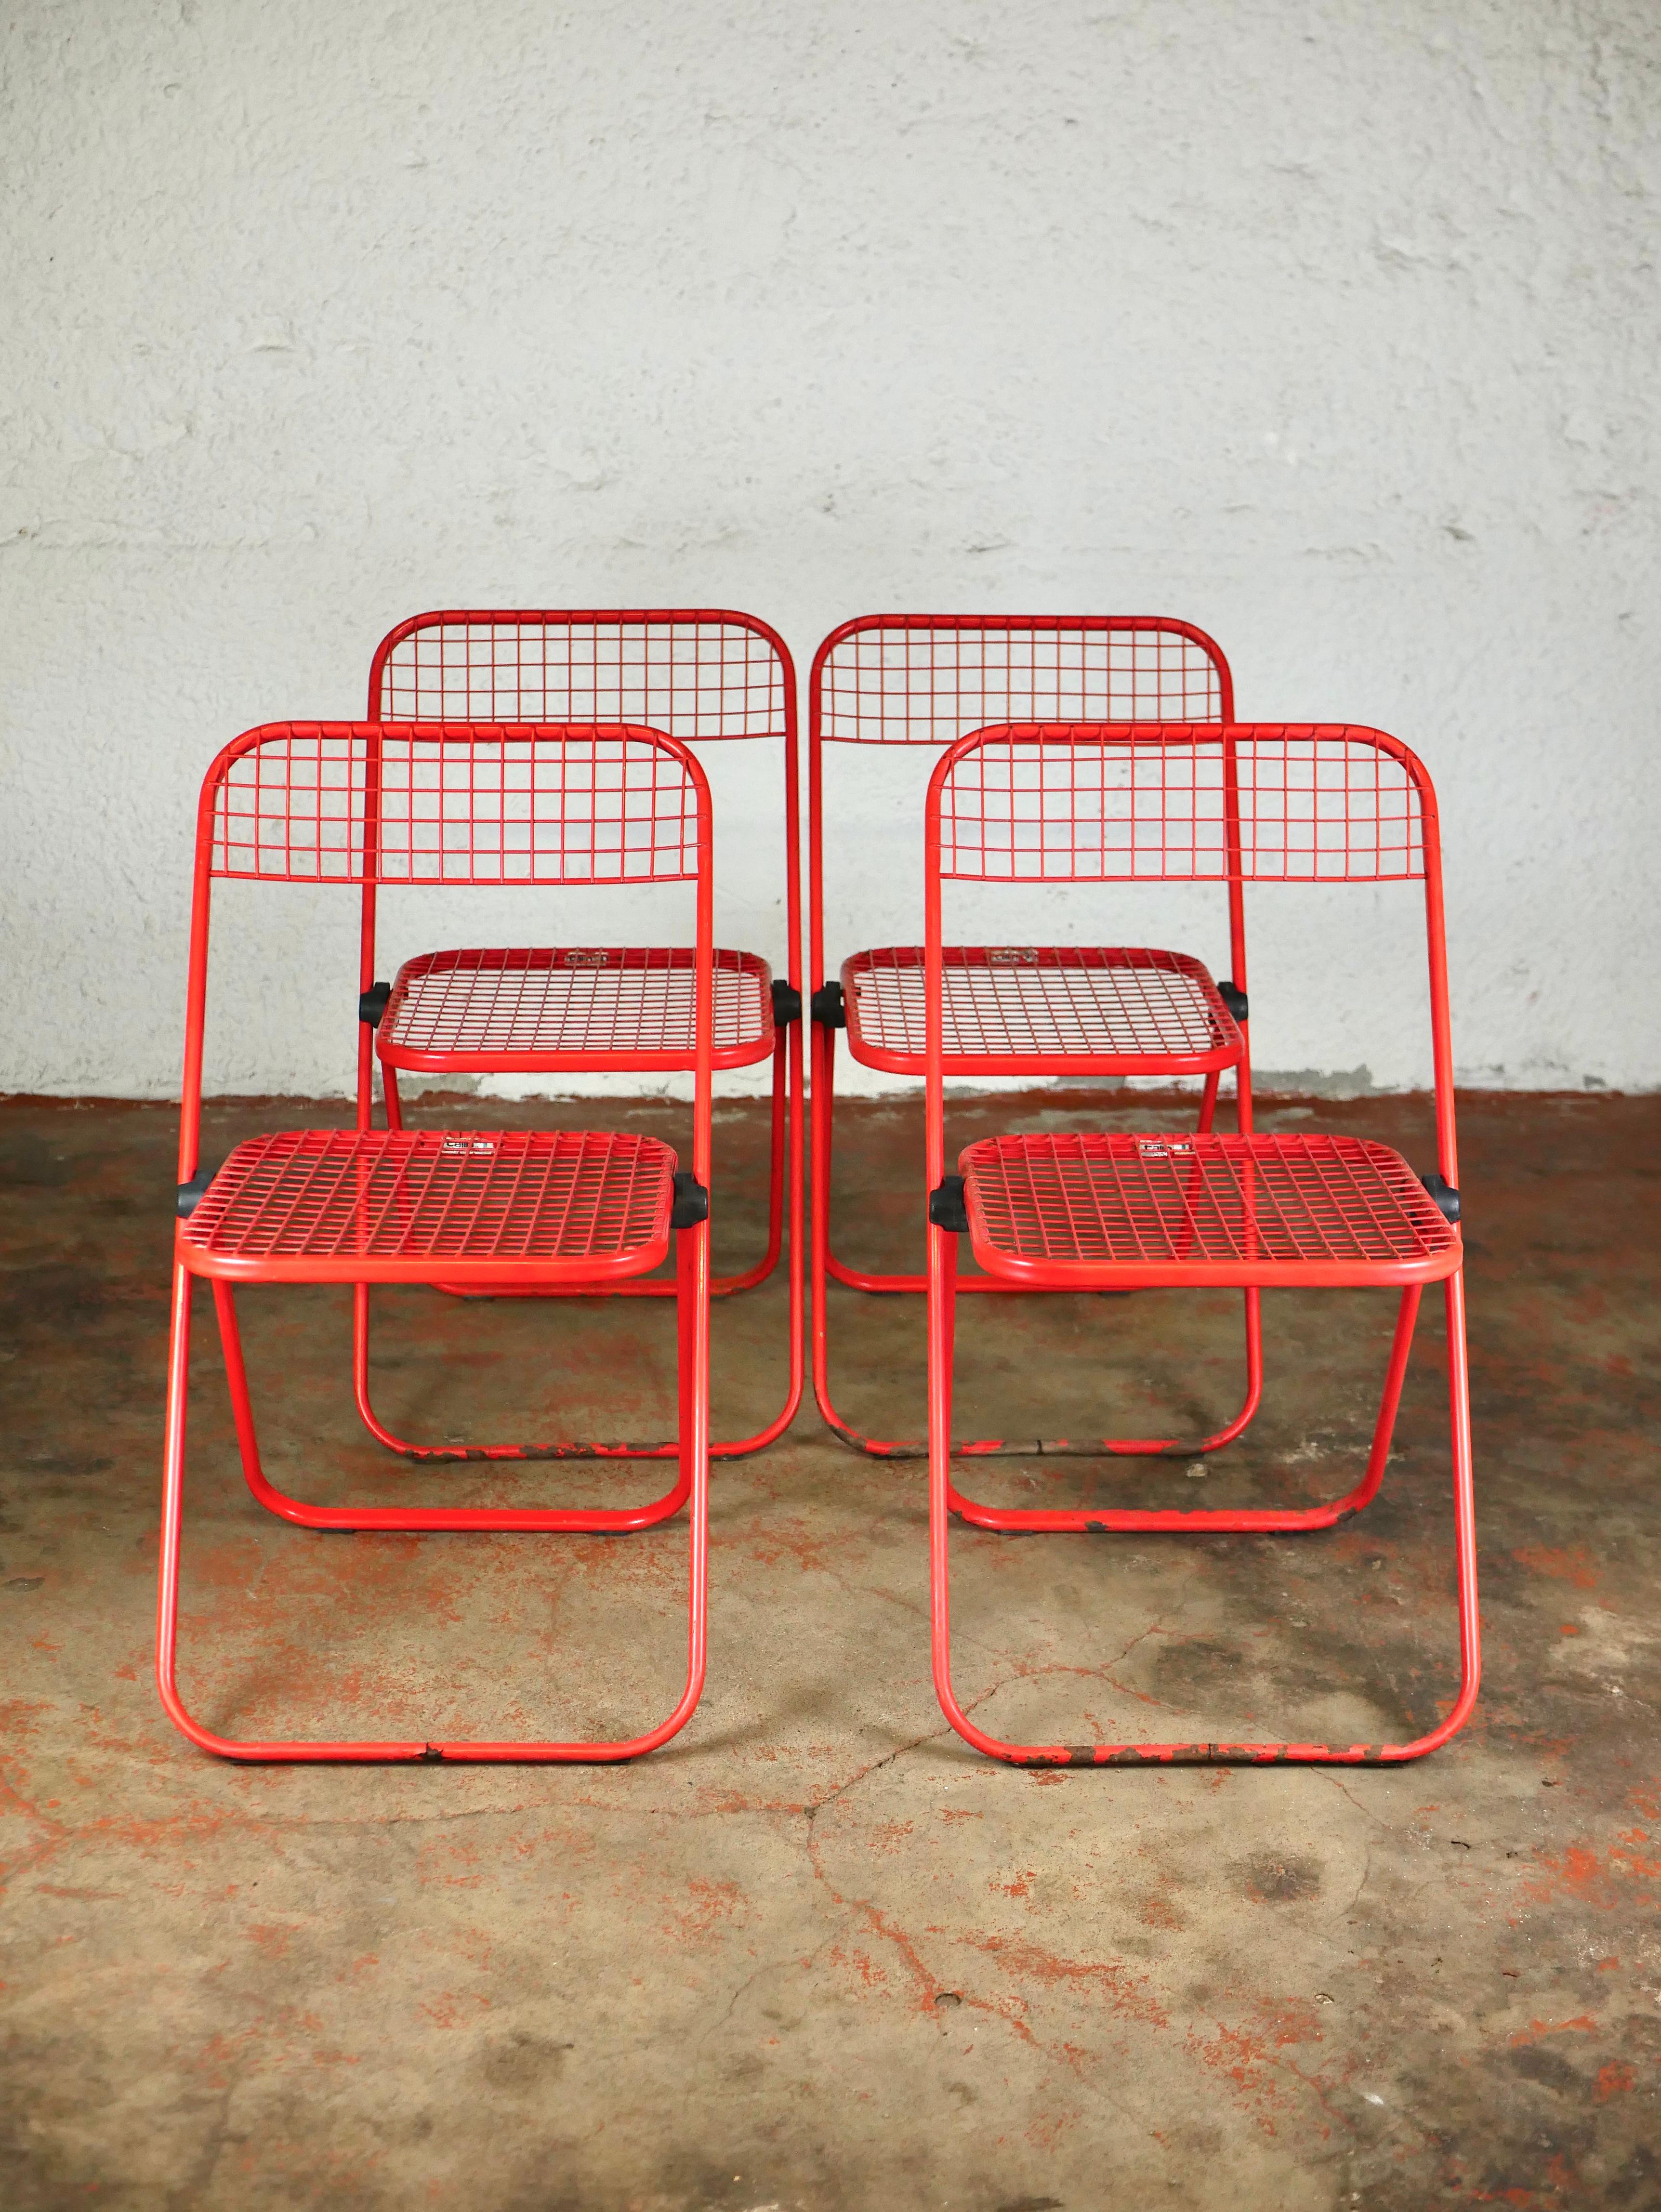 Set of 4 beautiful folding chairs by Talin, Italy, made in the 1980s.
In red lacquered metal, heavy and sturdy. The perfect colored chairs for a 1980s style interior.